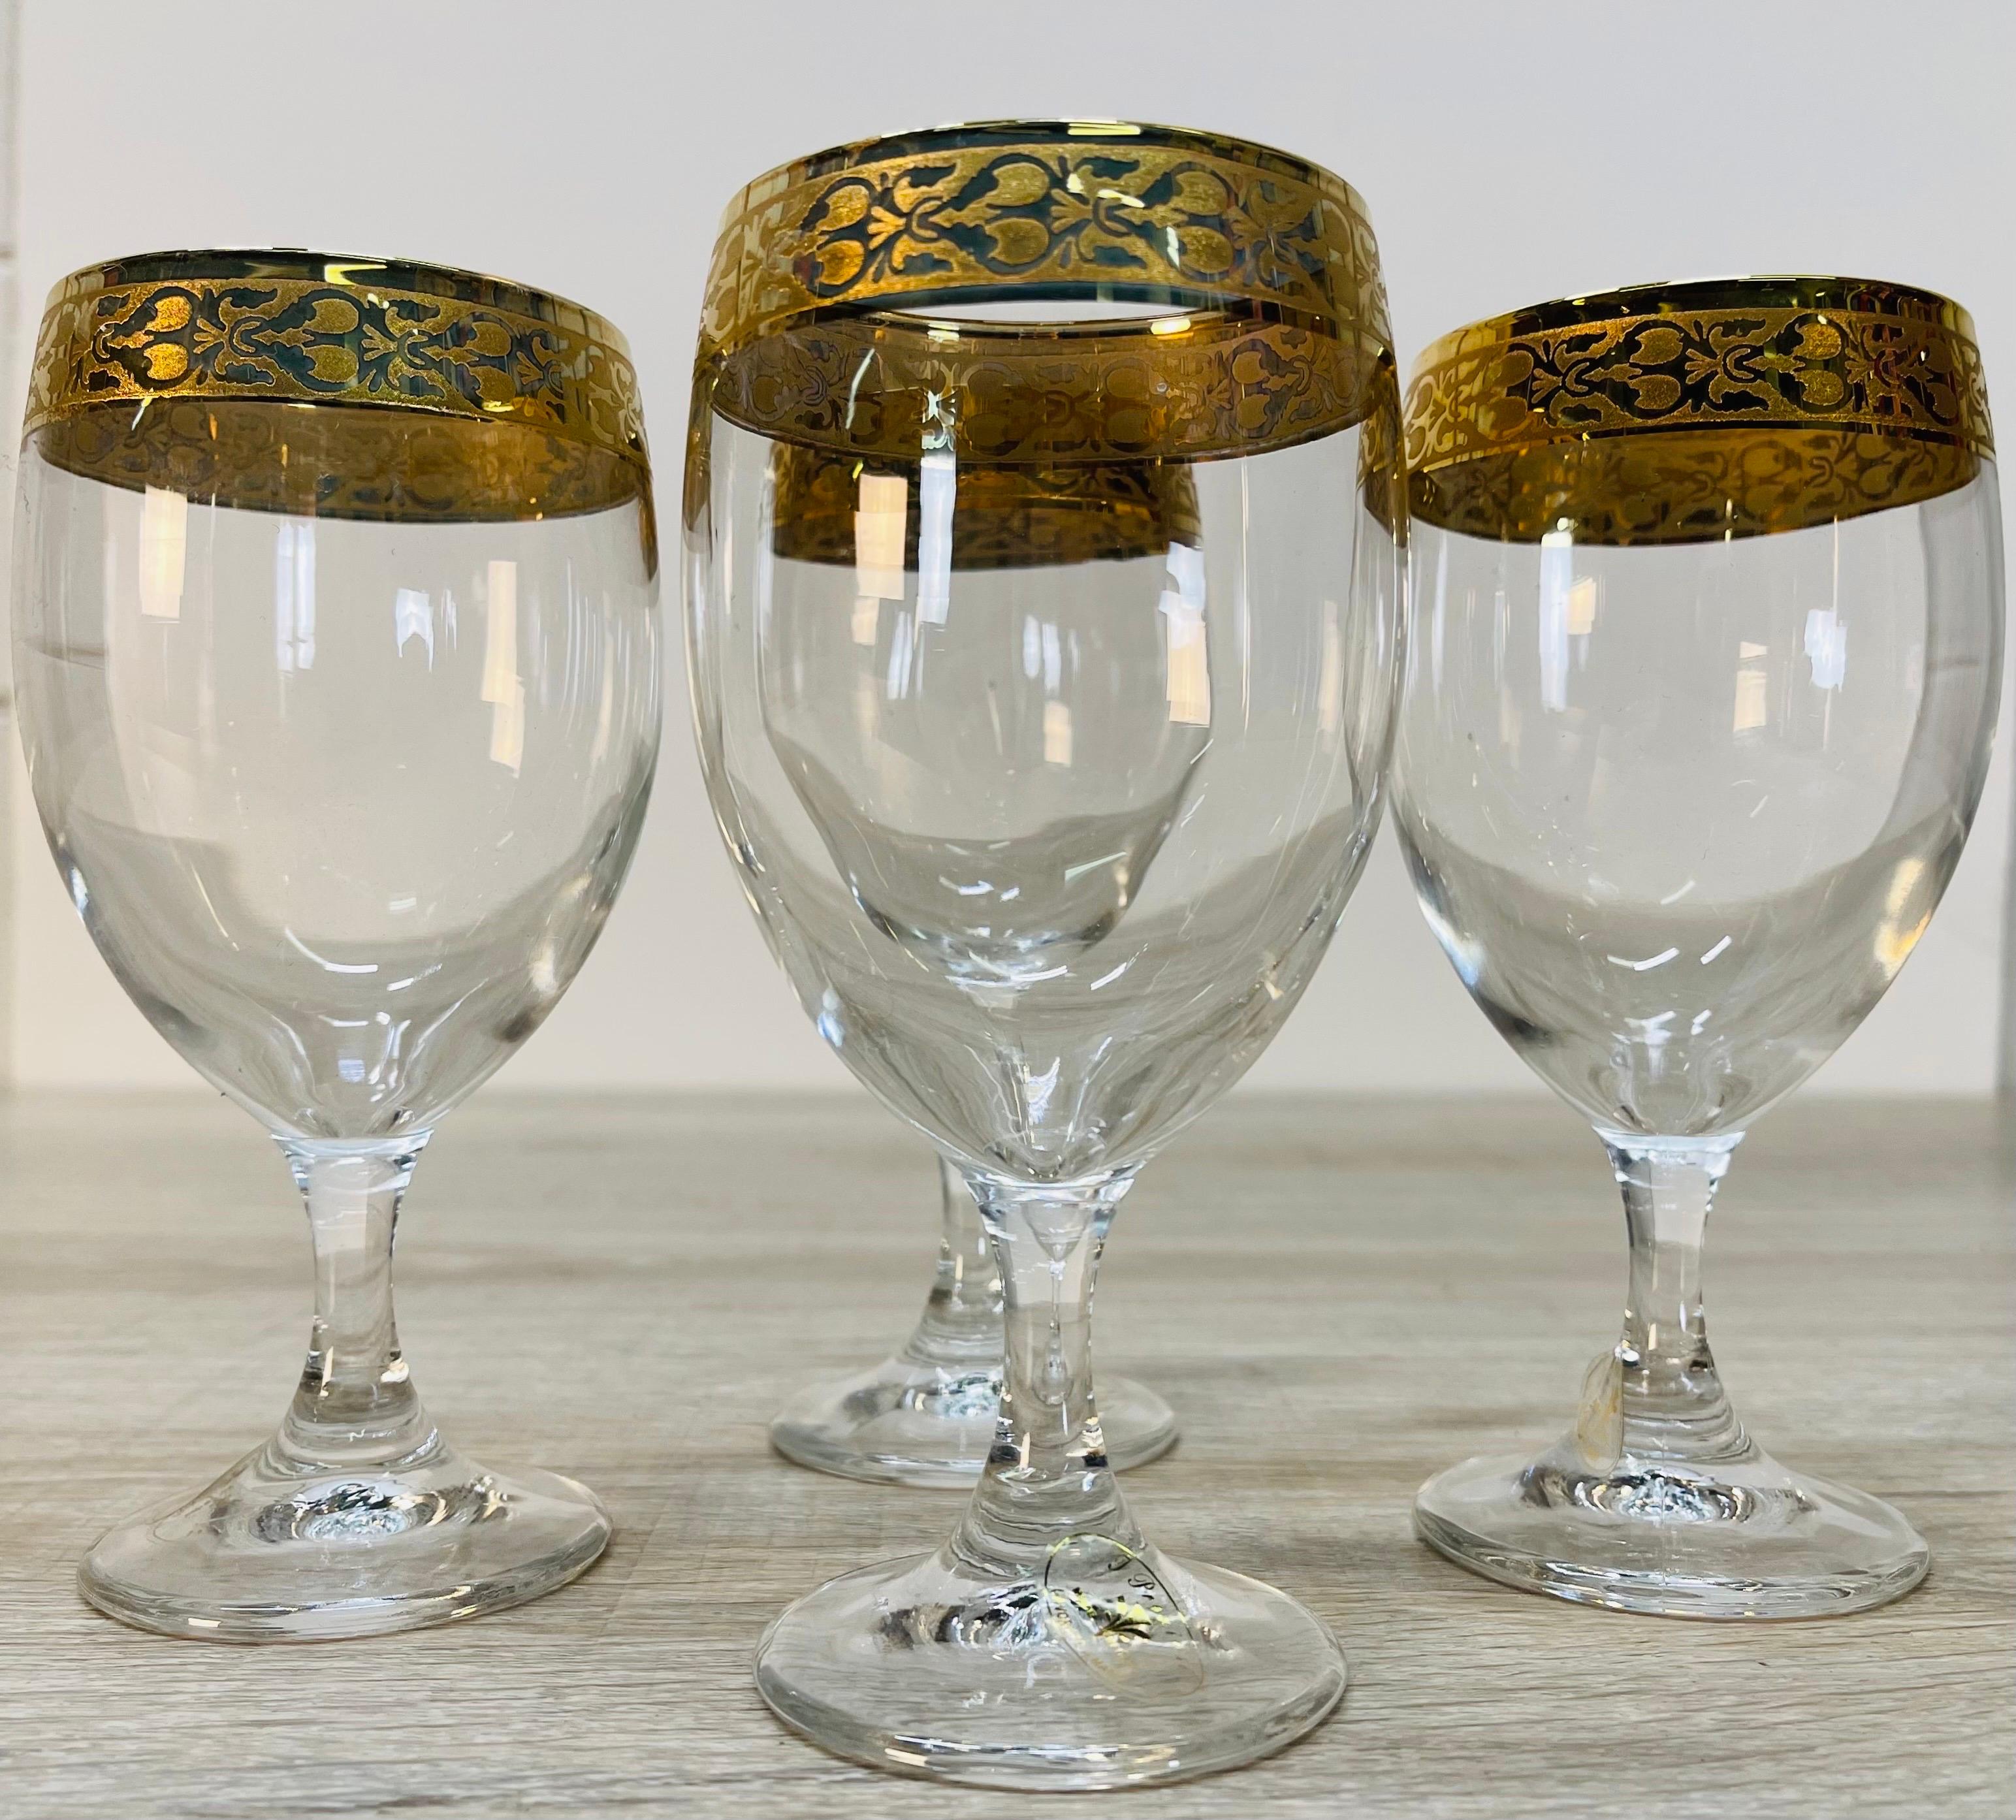 Vintage 1970s set of 4 Italian gold rim glass wine stems with original label. Marked.